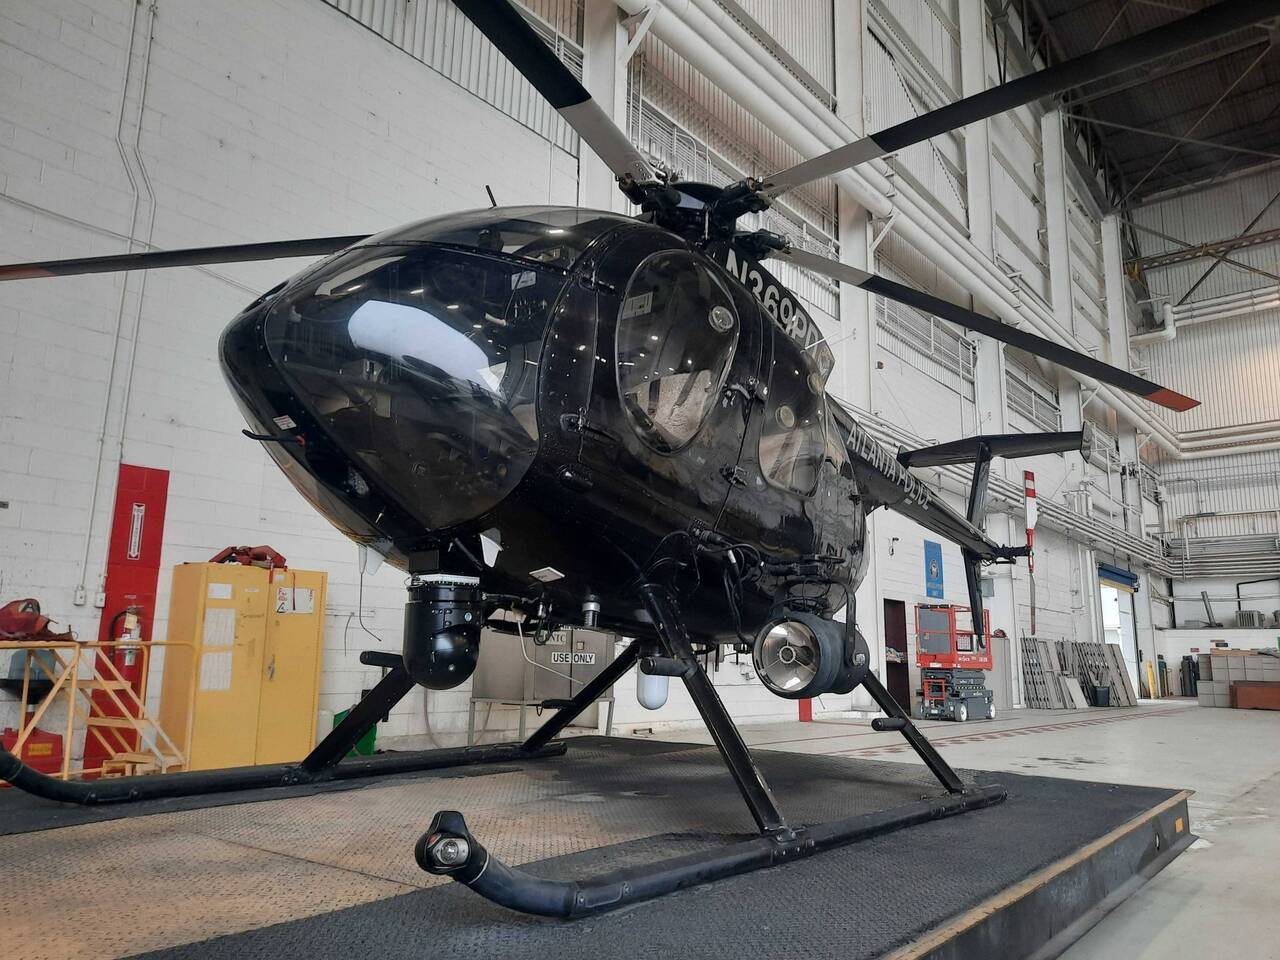 An Atlanta Police Department MD 580E helicopter in the hangar.